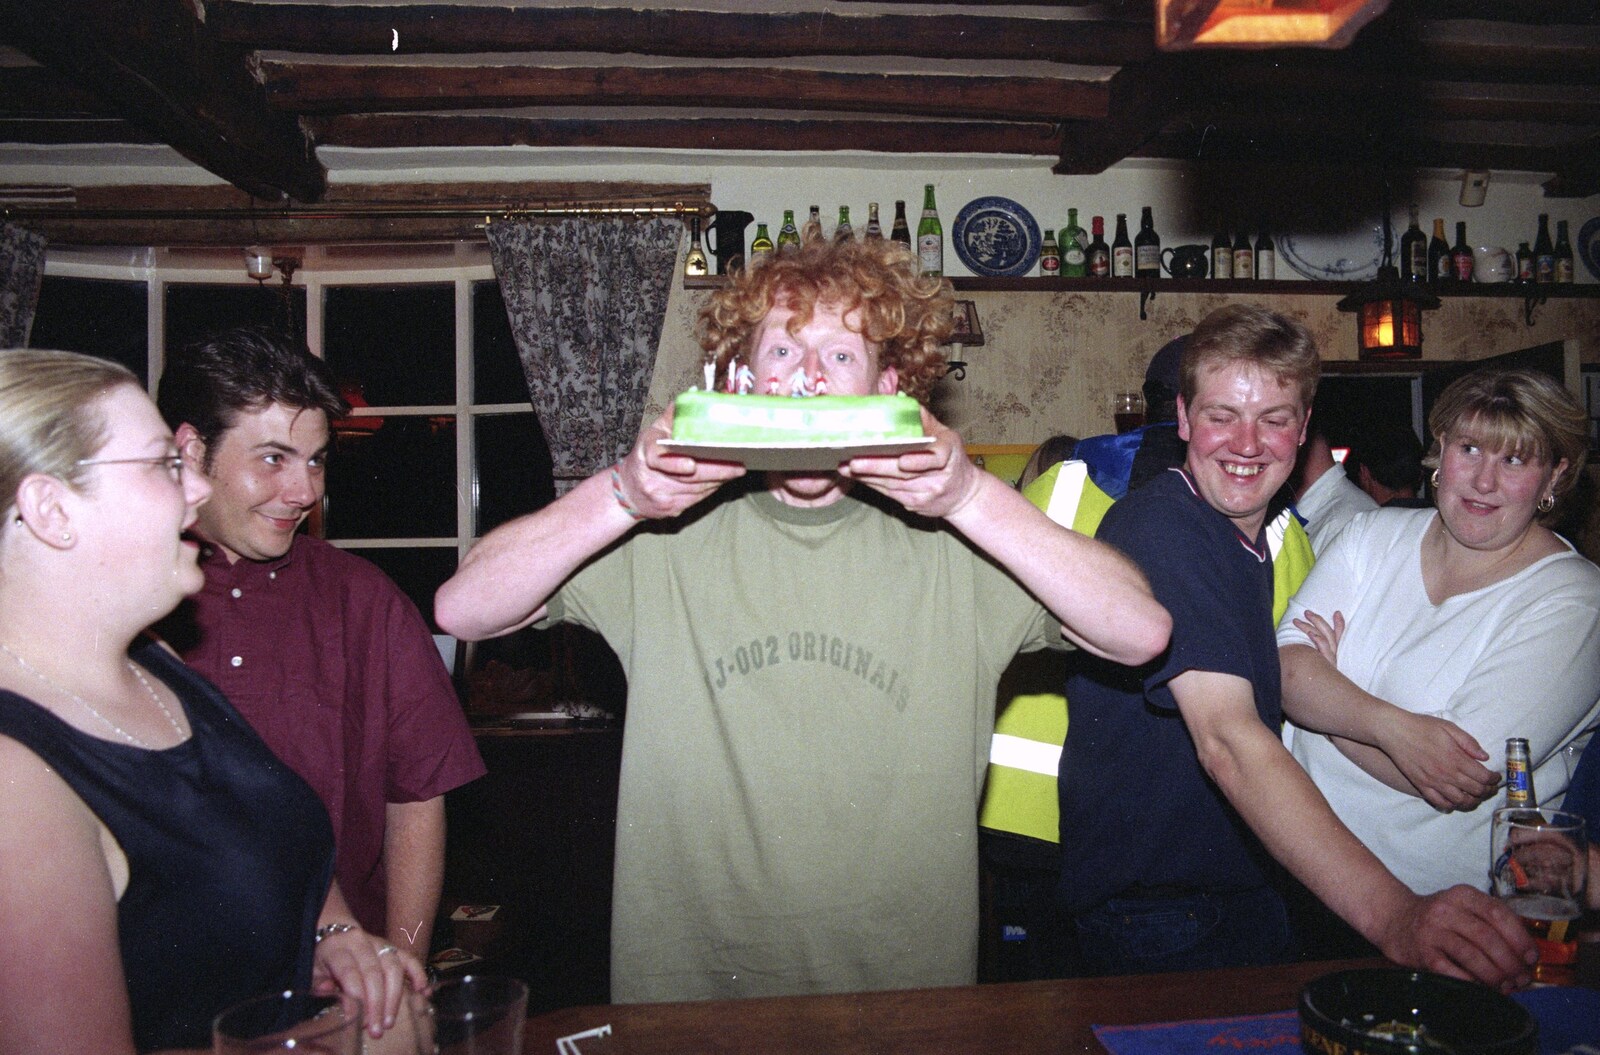 Wavy holds up his cake from Wavy's Thirtieth Birthday, The Swan Inn, Brome, Suffolk - 24th May 2000